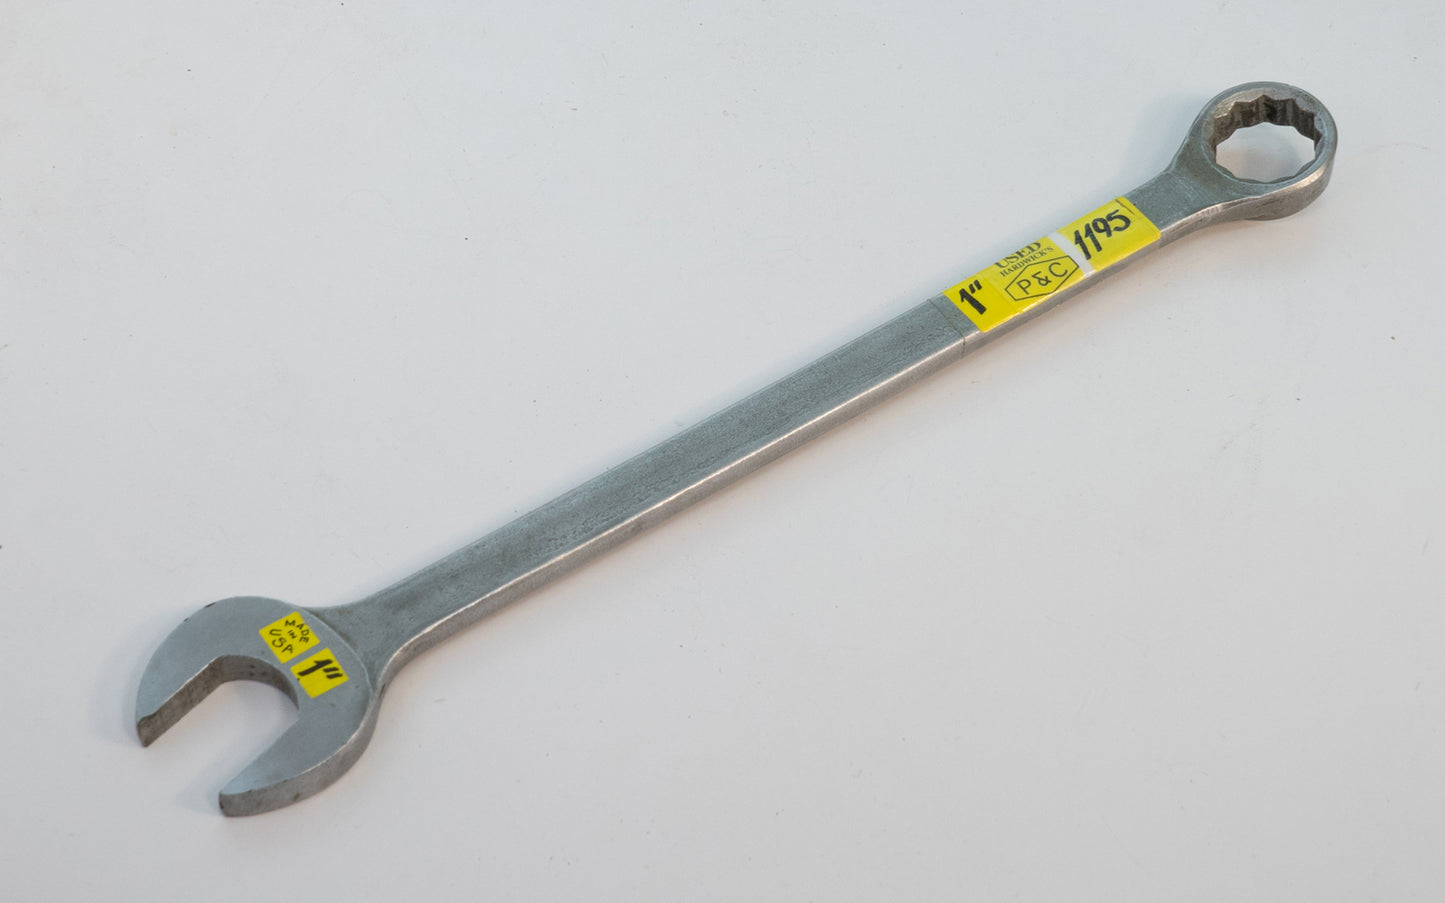 1" P&C combination Wrench. 2732. Made in USA